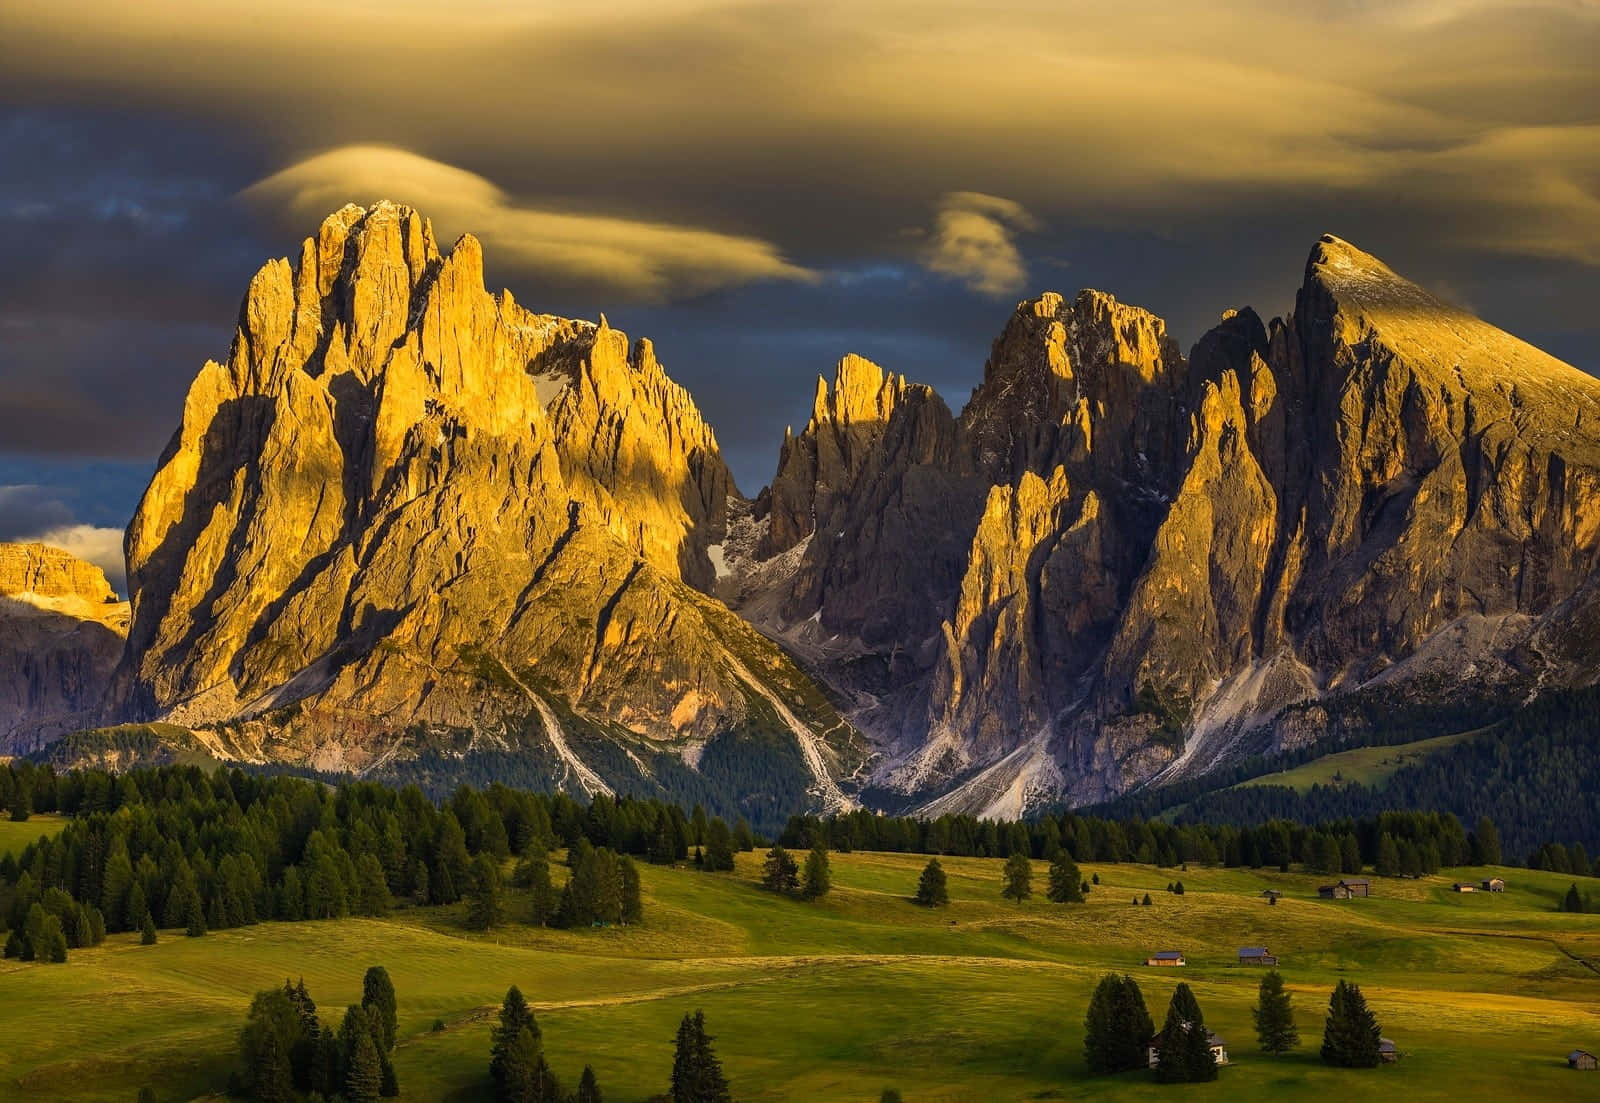 The Dolomites In The Evening Light